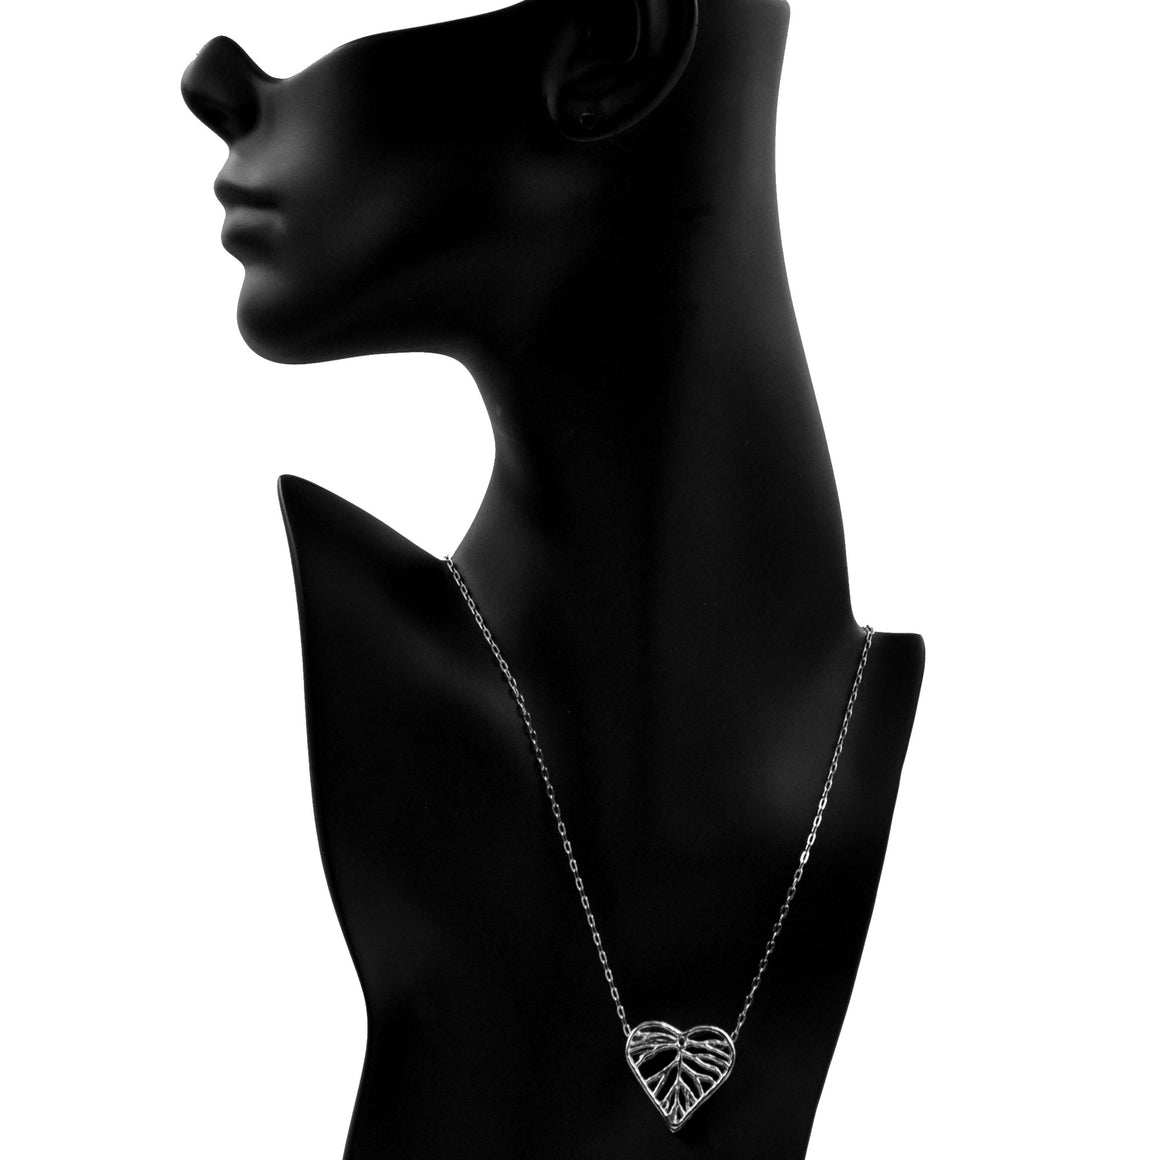 Heart Leaf Dimensional Necklace (Small) - Platinum Silver